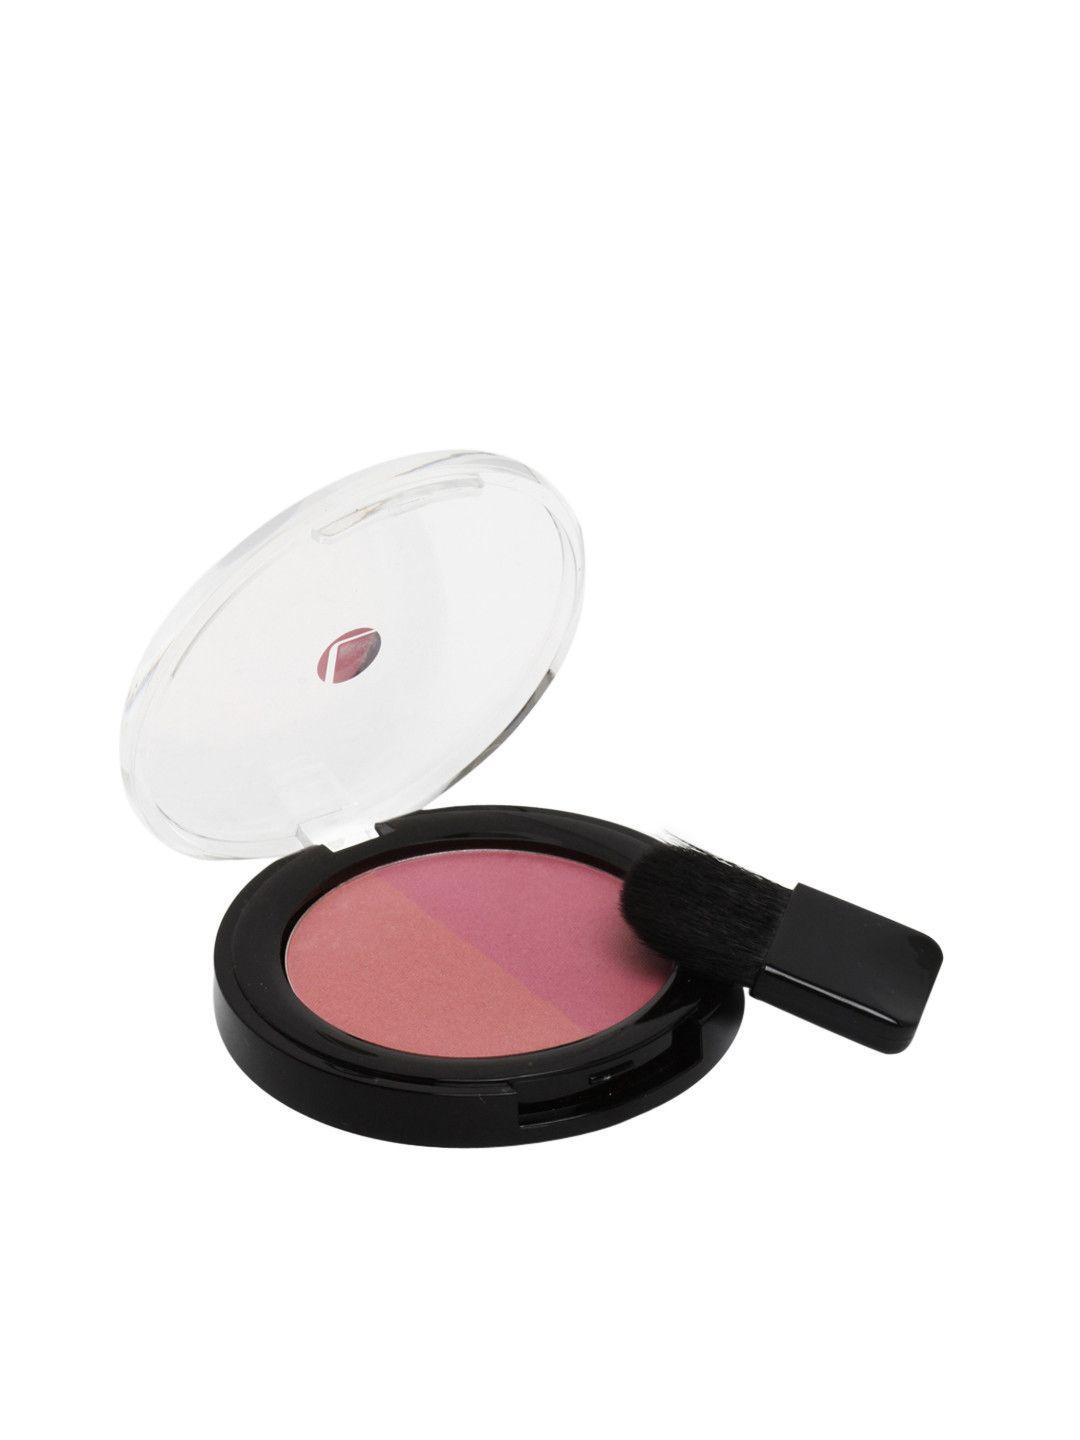 lakme absolute face stylist blush duos - coral